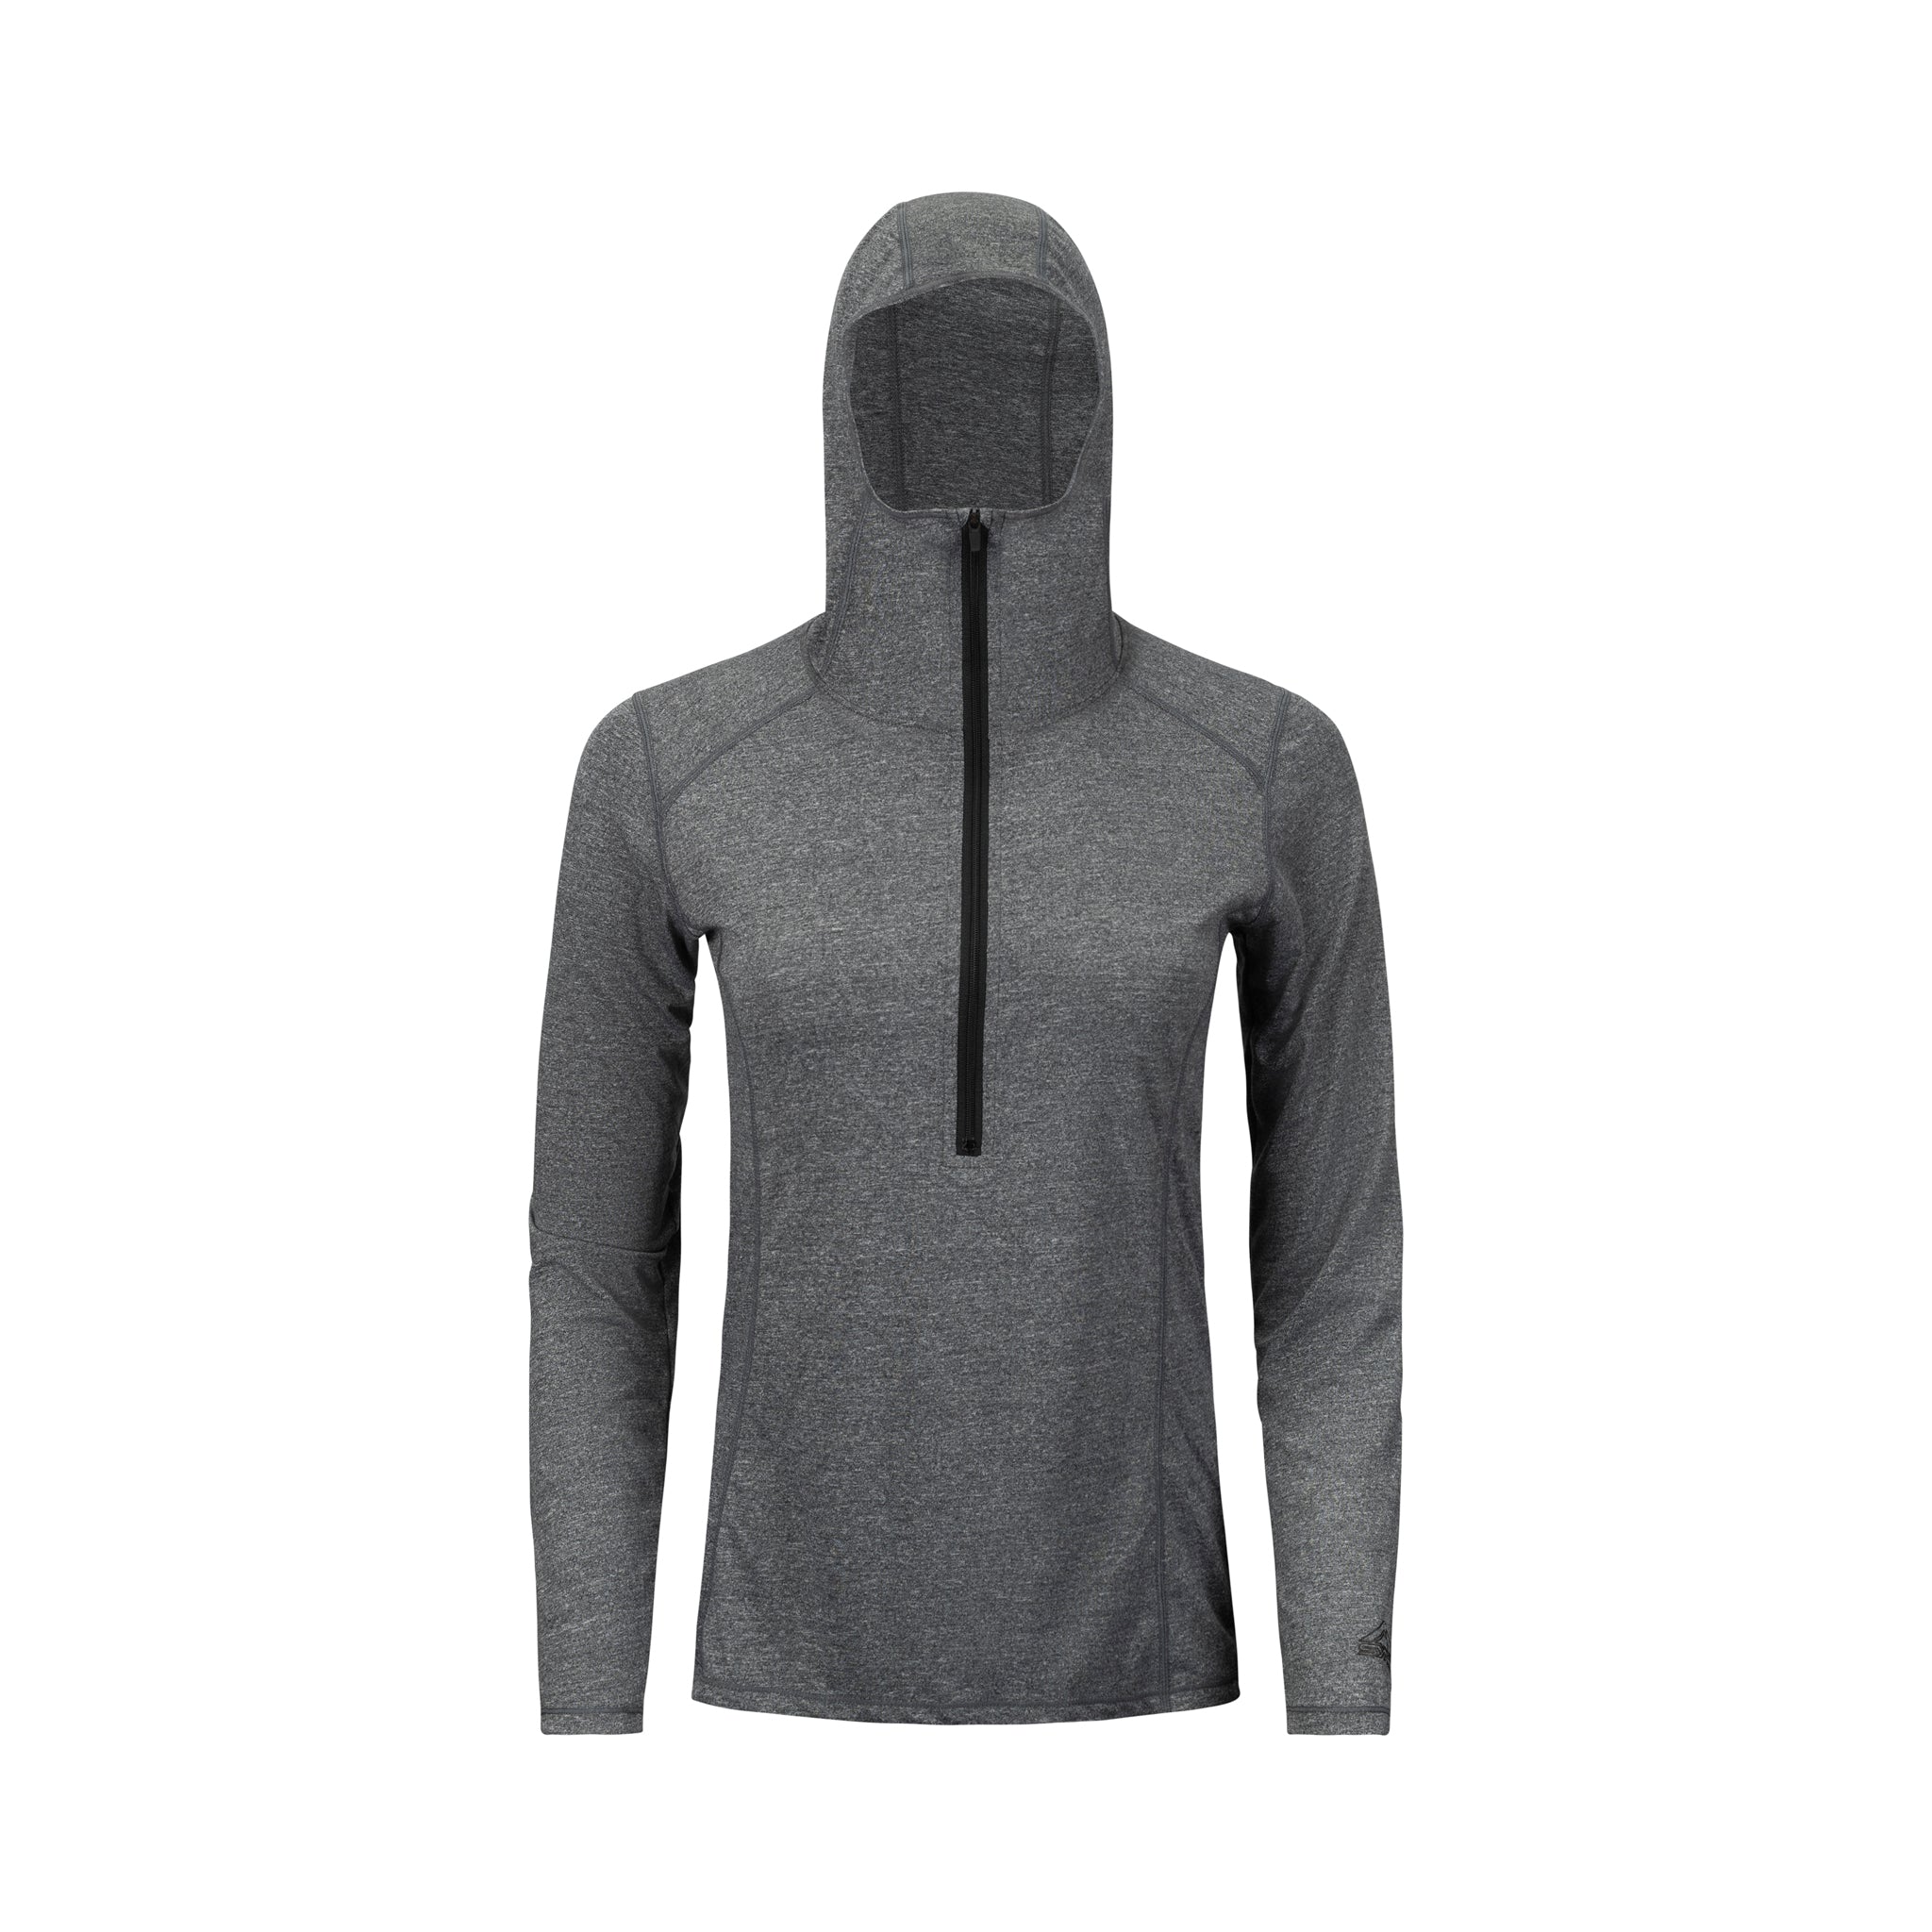 sync-performance-women's-deluge-1/2-zip-hooded-long-sleeve-grey-front